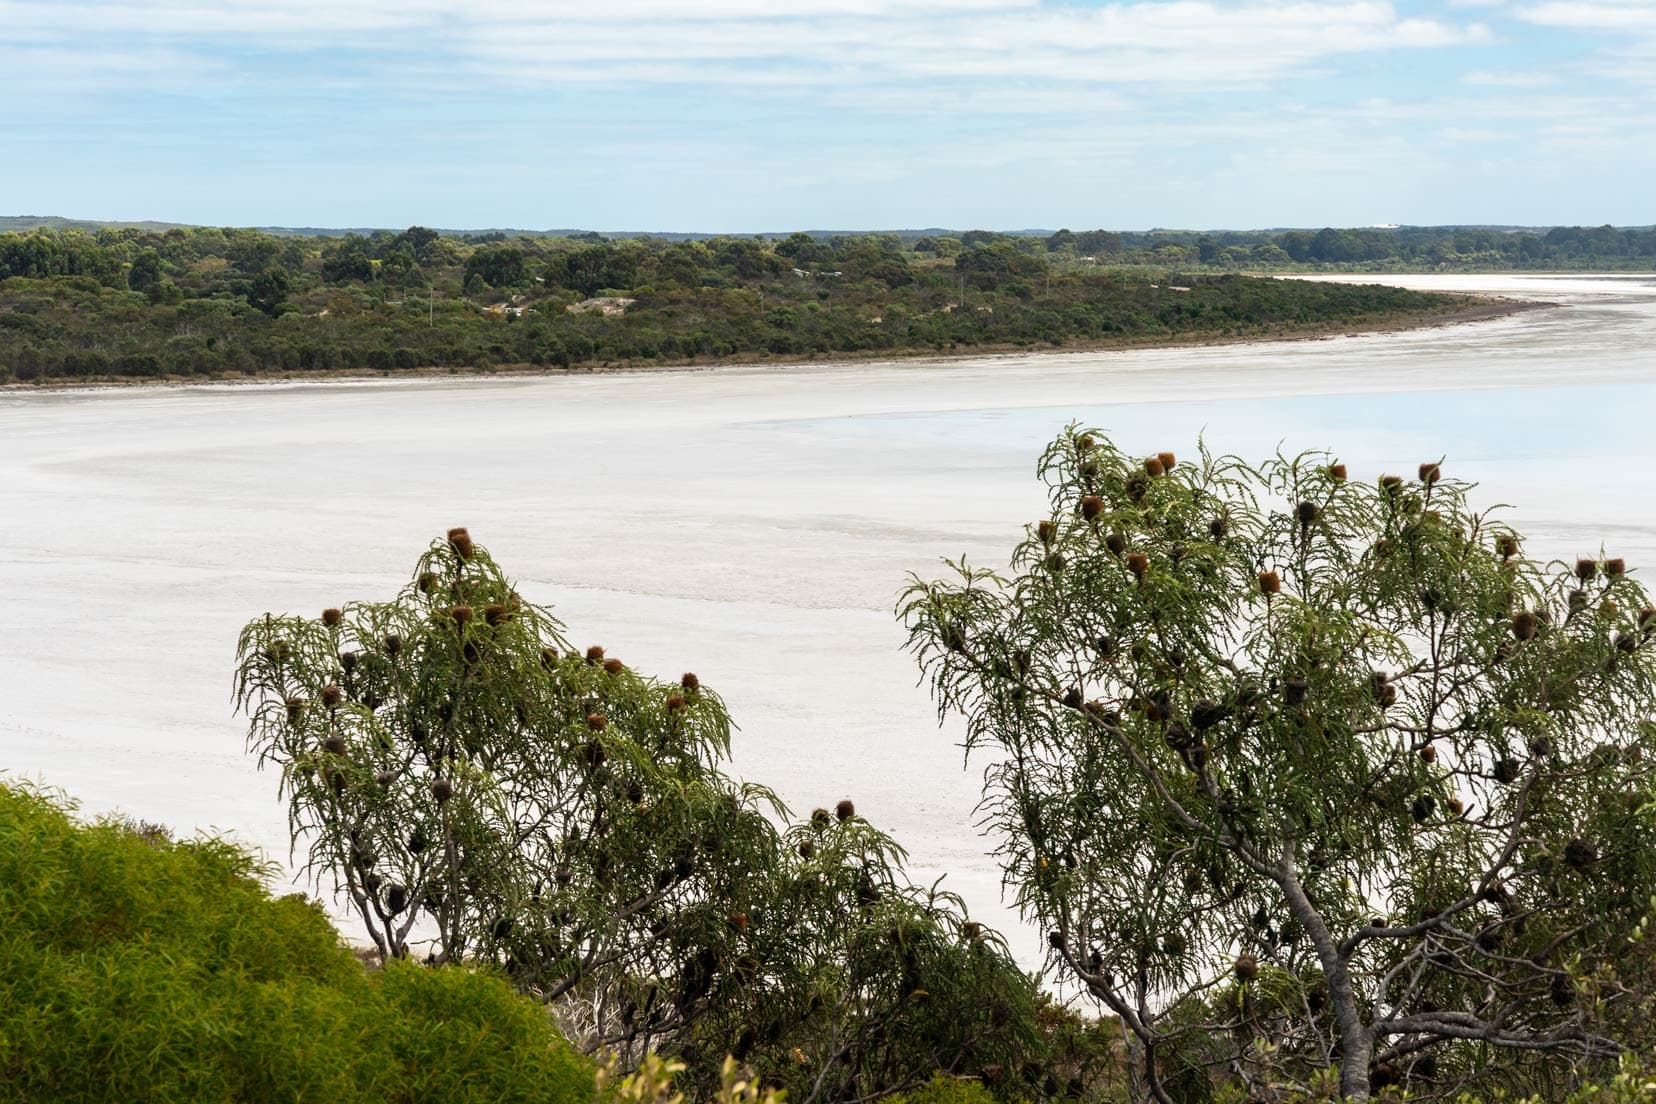 Pink lake - that is not pink and open expanse of white salt and shallow lake surrounded by low bushland